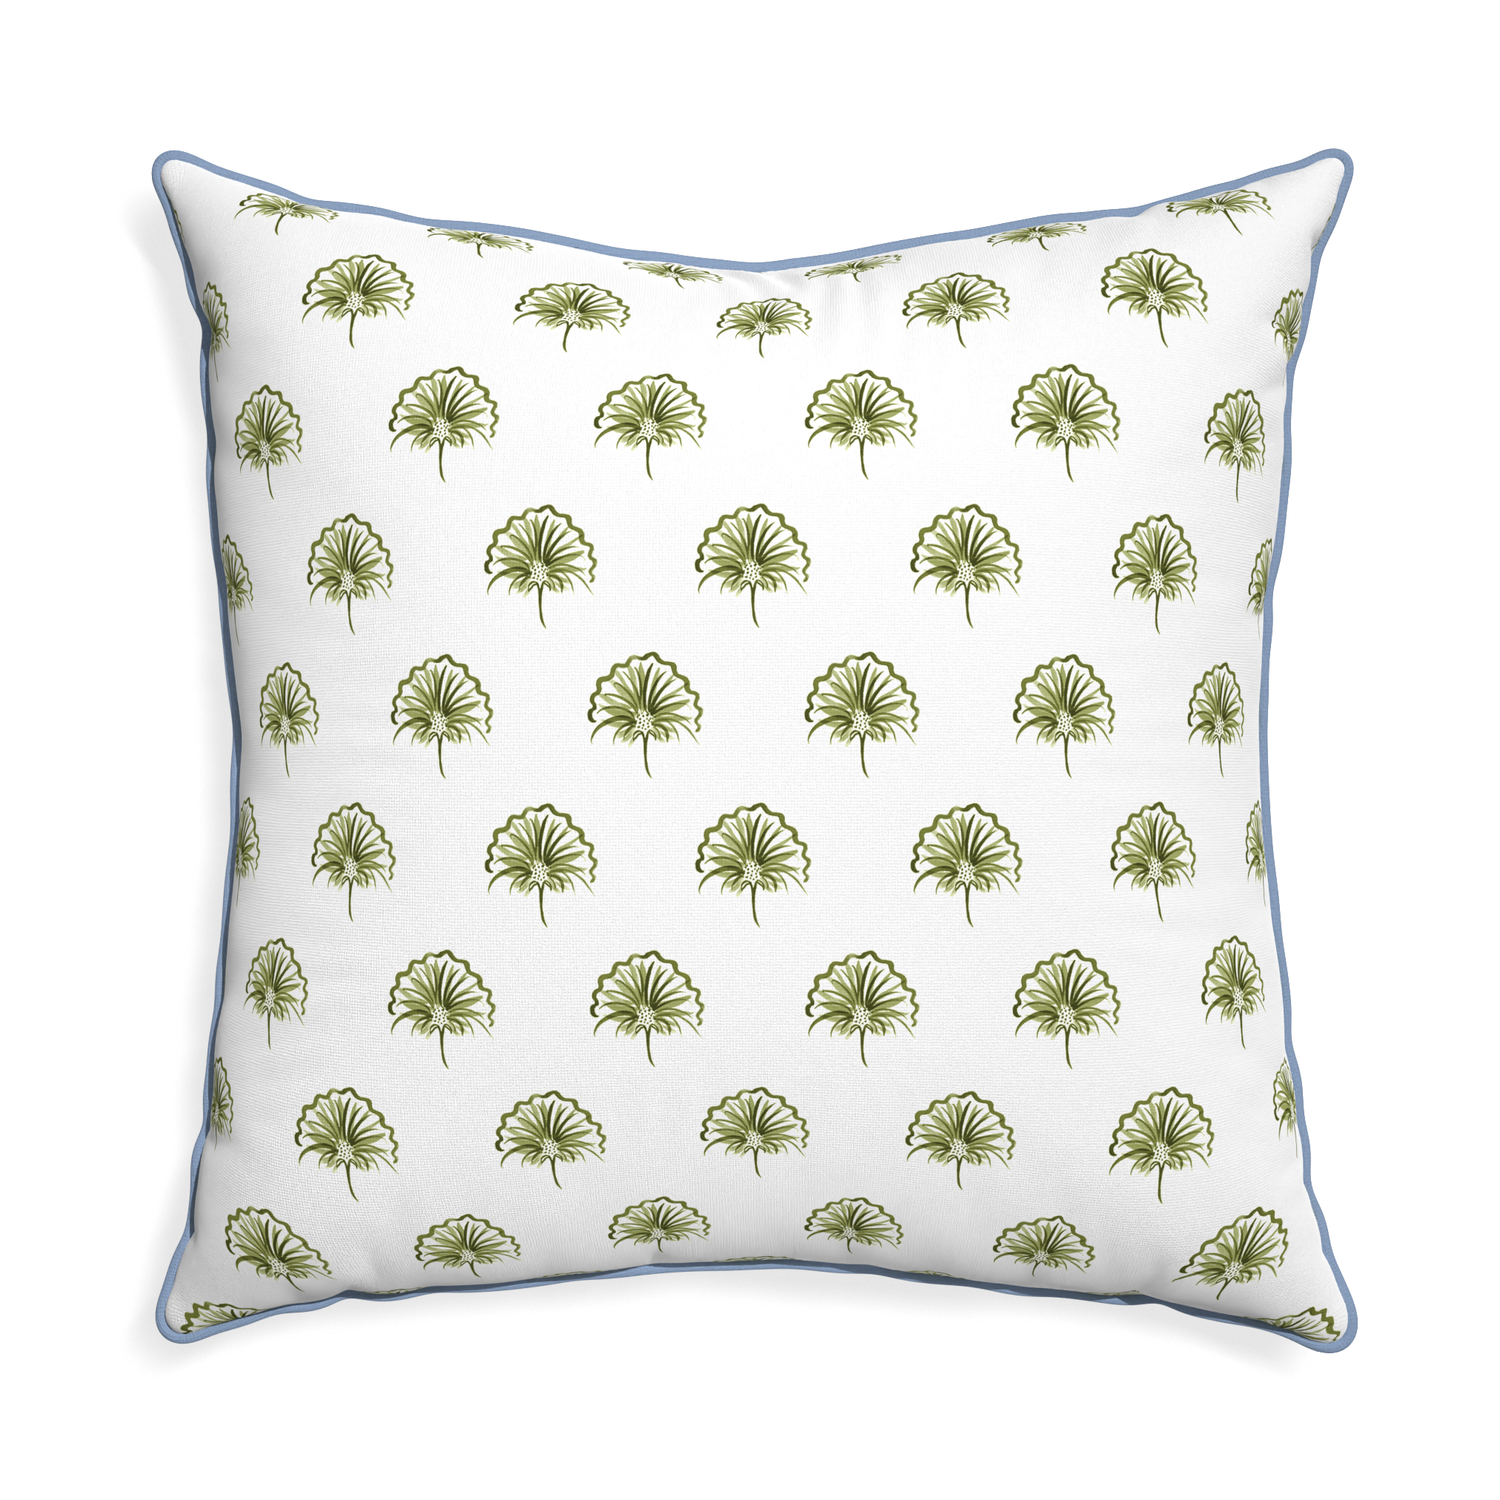 Euro-sham penelope moss custom green floralpillow with sky piping on white background